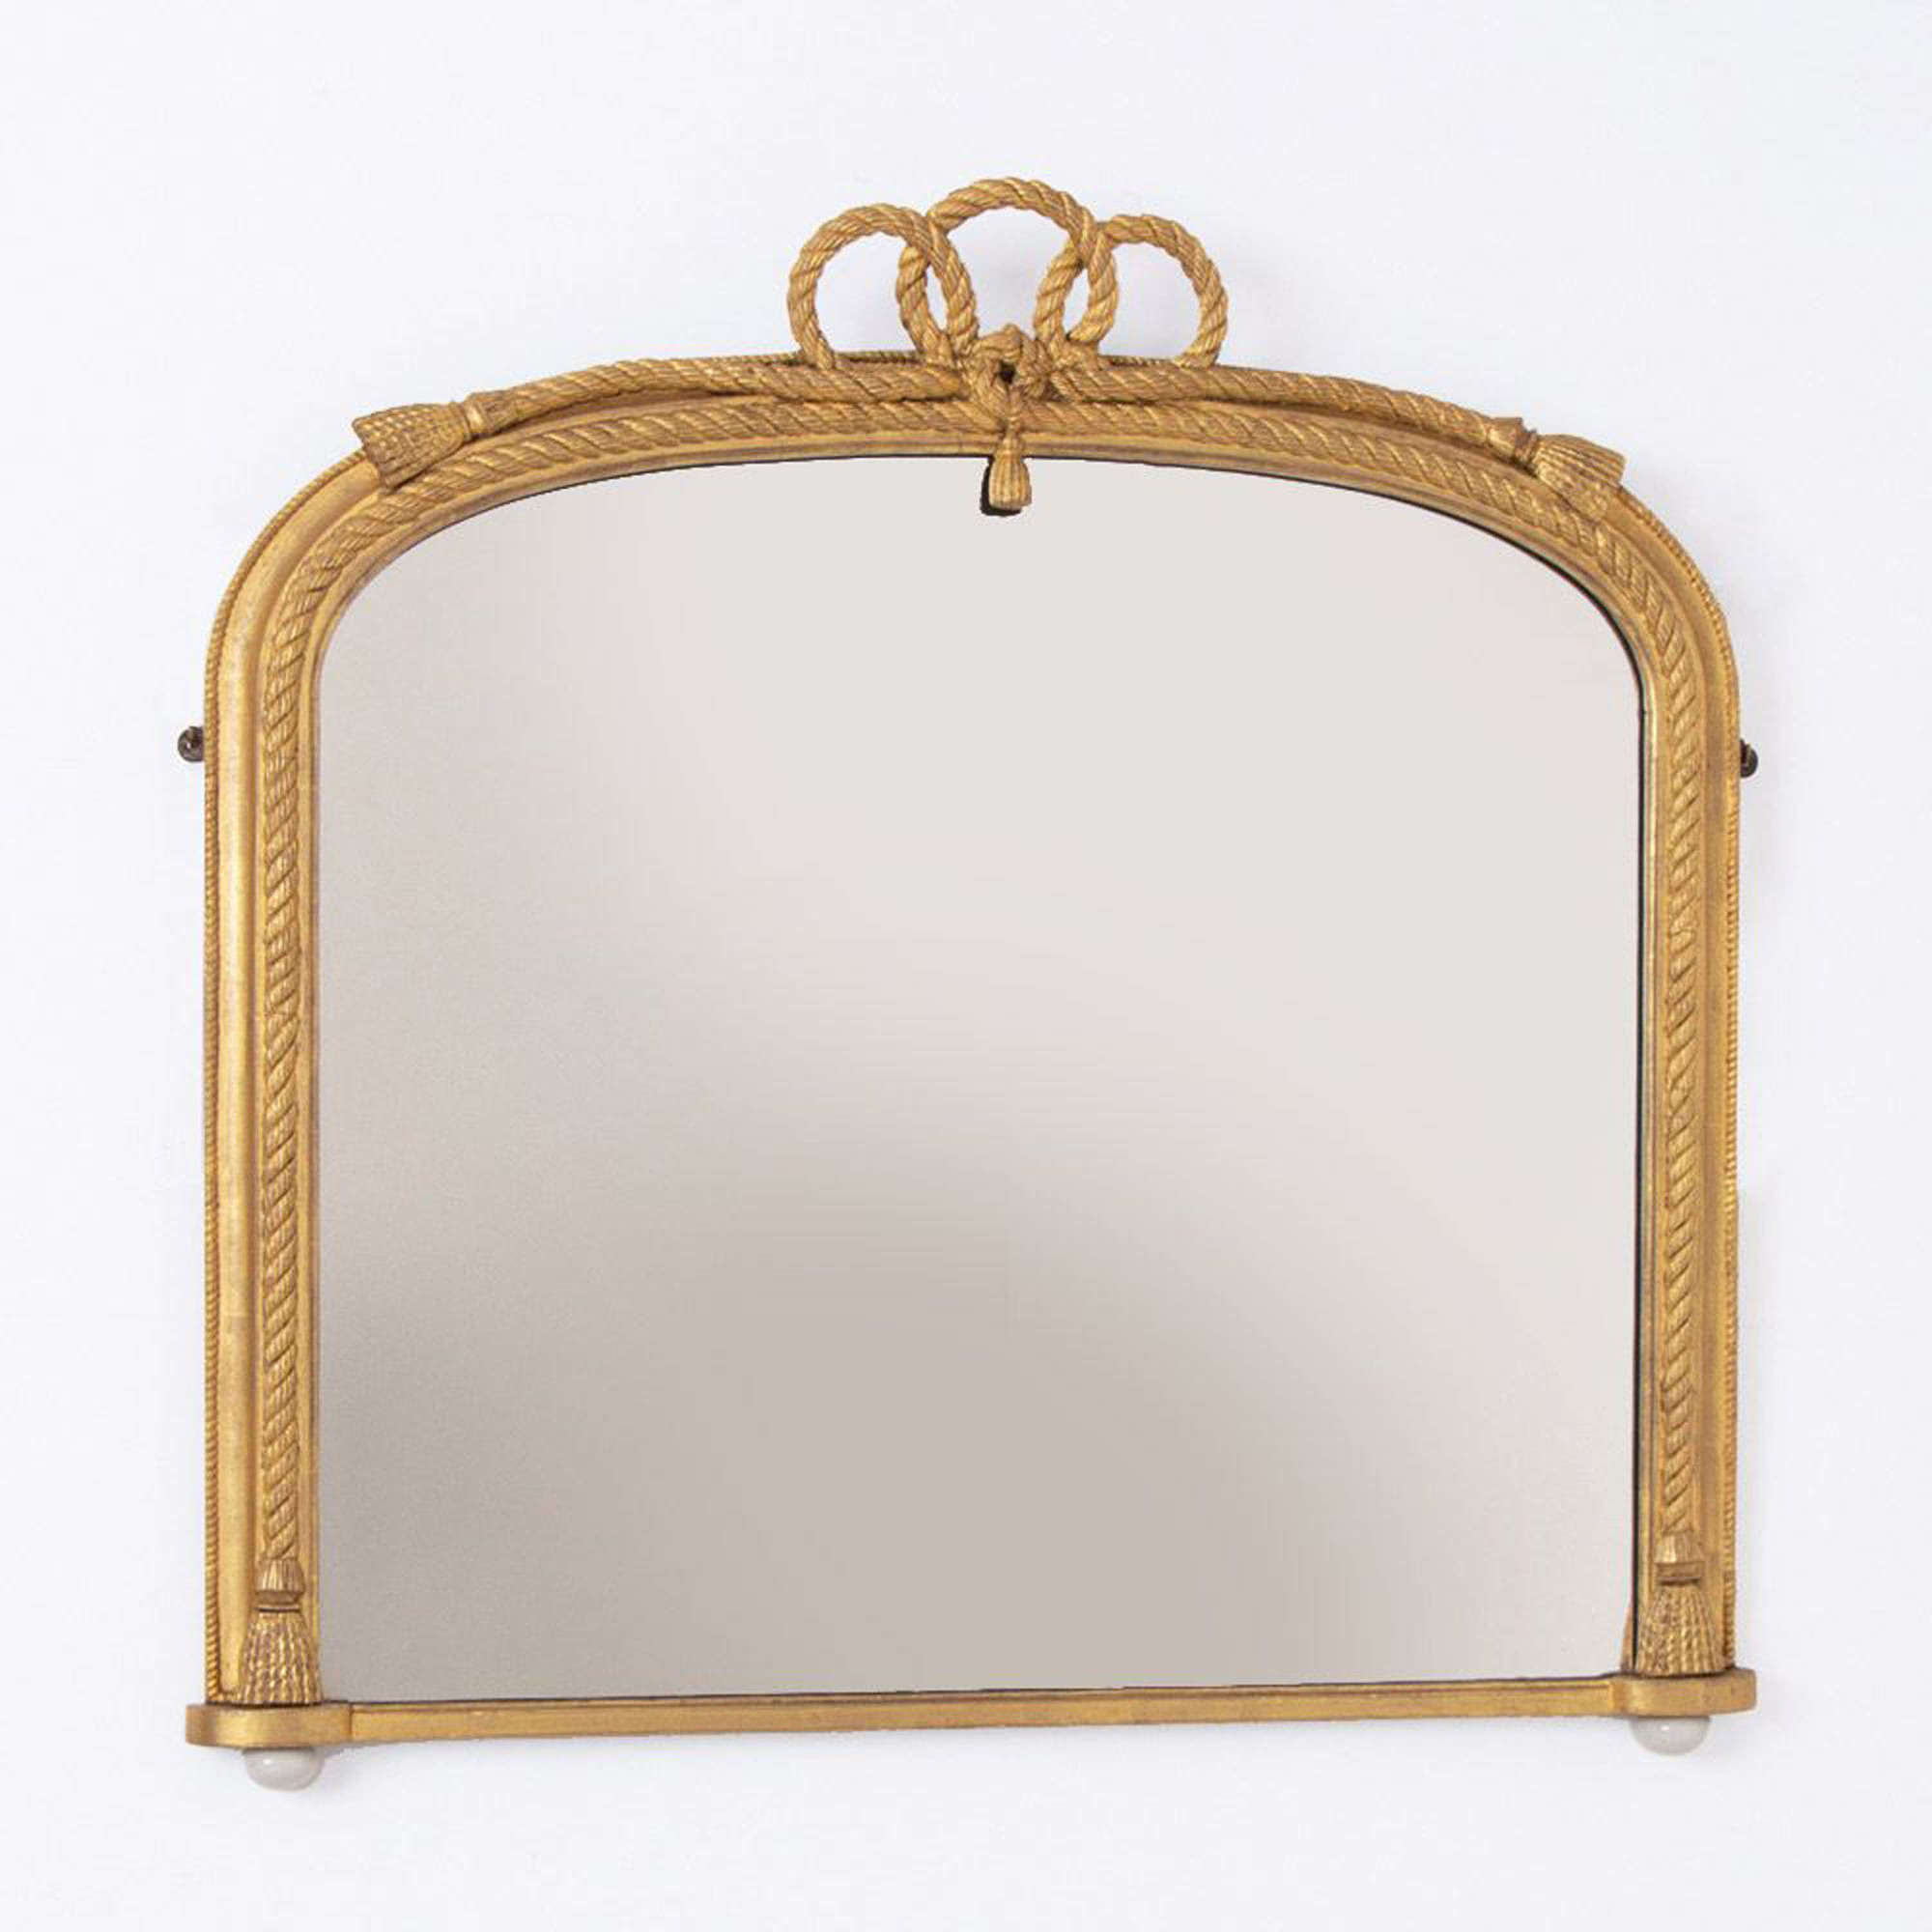 Antique Water Gilded Overmantle Maritime Rope Mirror c.1860